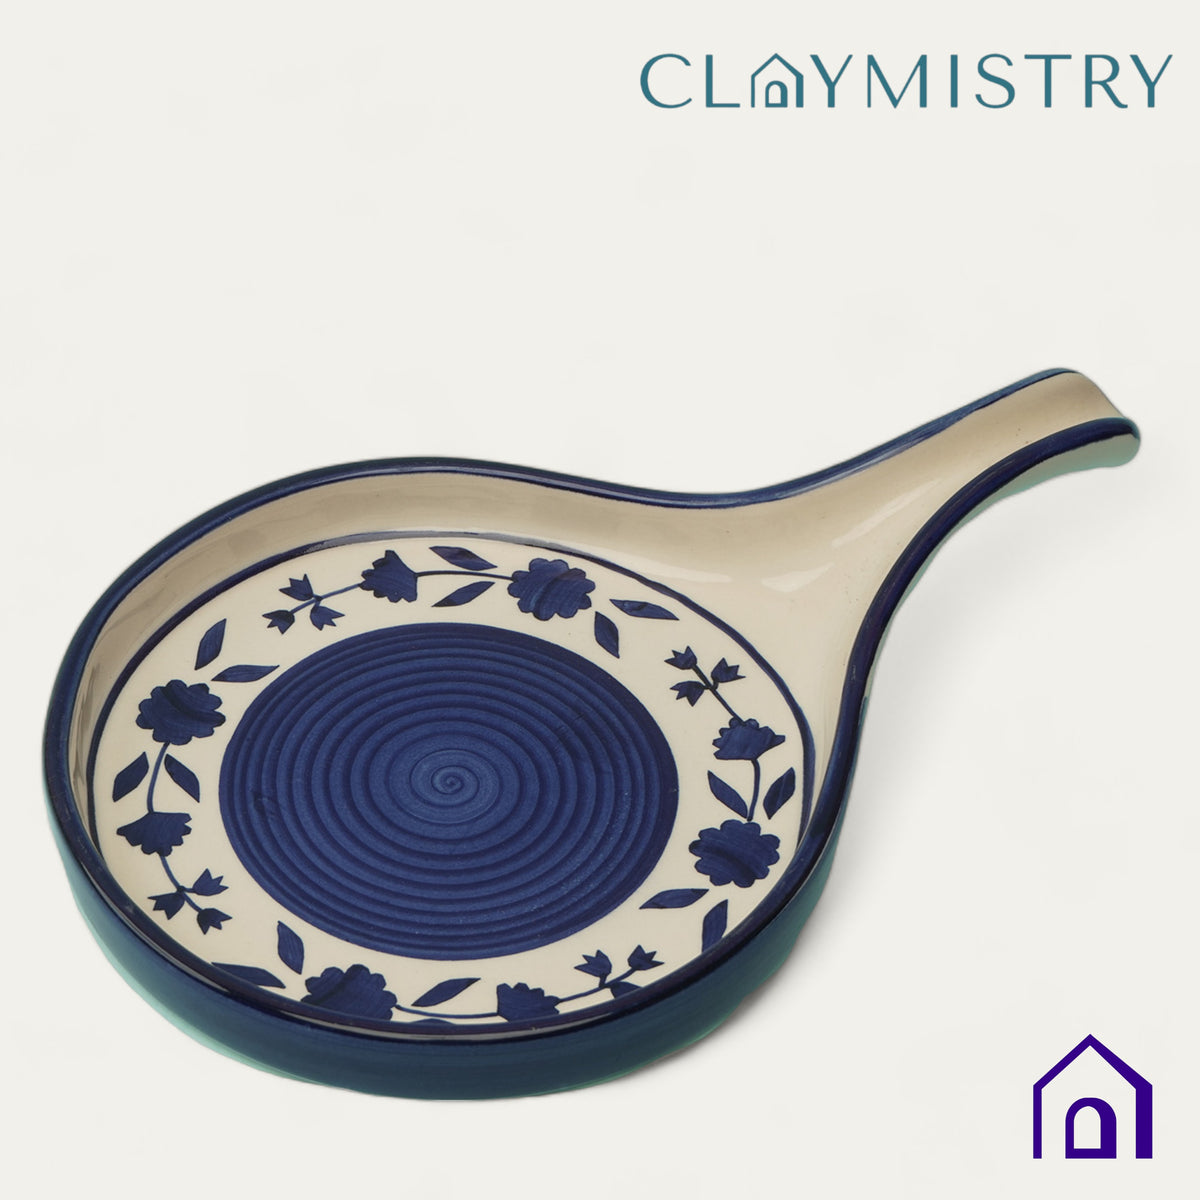 Claymistry Ceramic Dinner & Snacks Round Blue & White Florals with Handle Tray, Set of 1 | 33cm * 21cm * 3cm | Glossy Finish | Dishwasher & Microwave Safe | Dinnerware Serving Thali | Premium Crockery